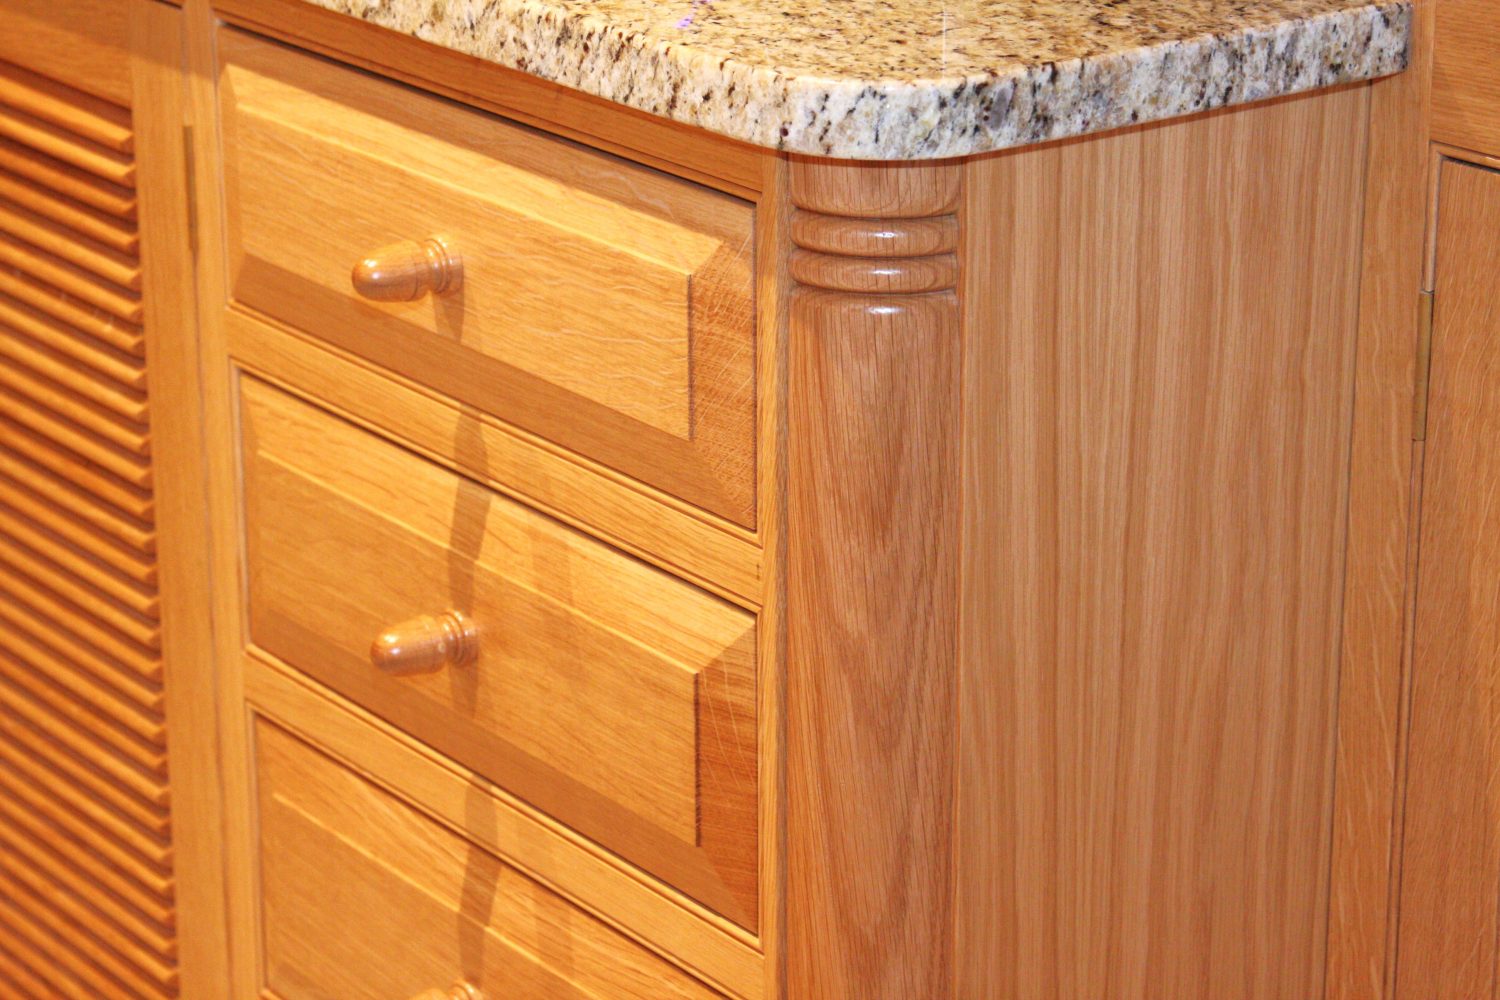 Quartered corner columb and raised and fielded drawer fronts with acorn knobs